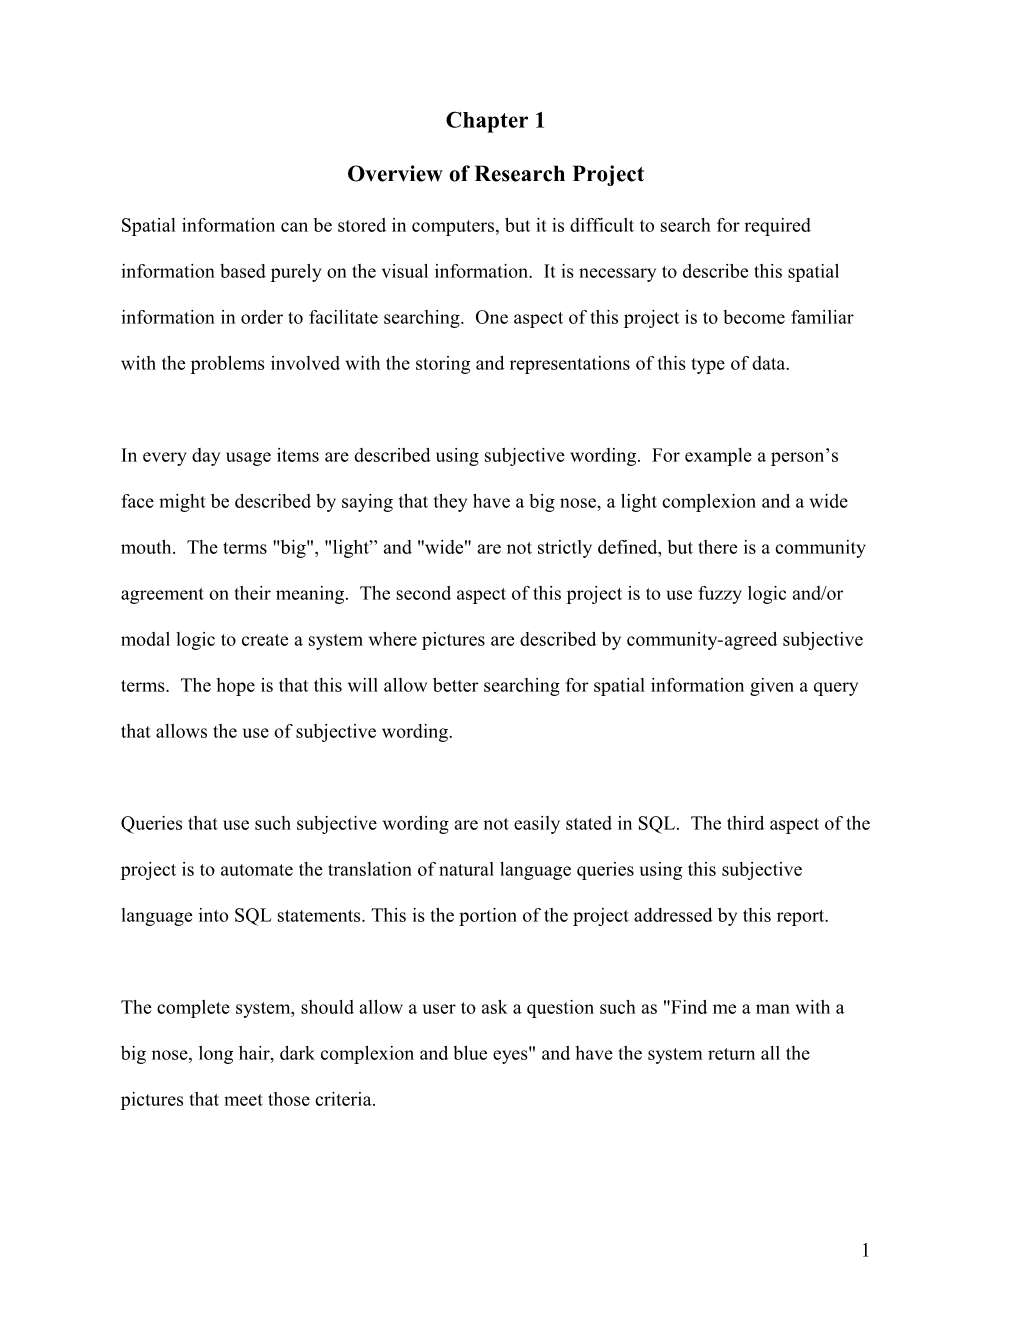 Overview of Research Project